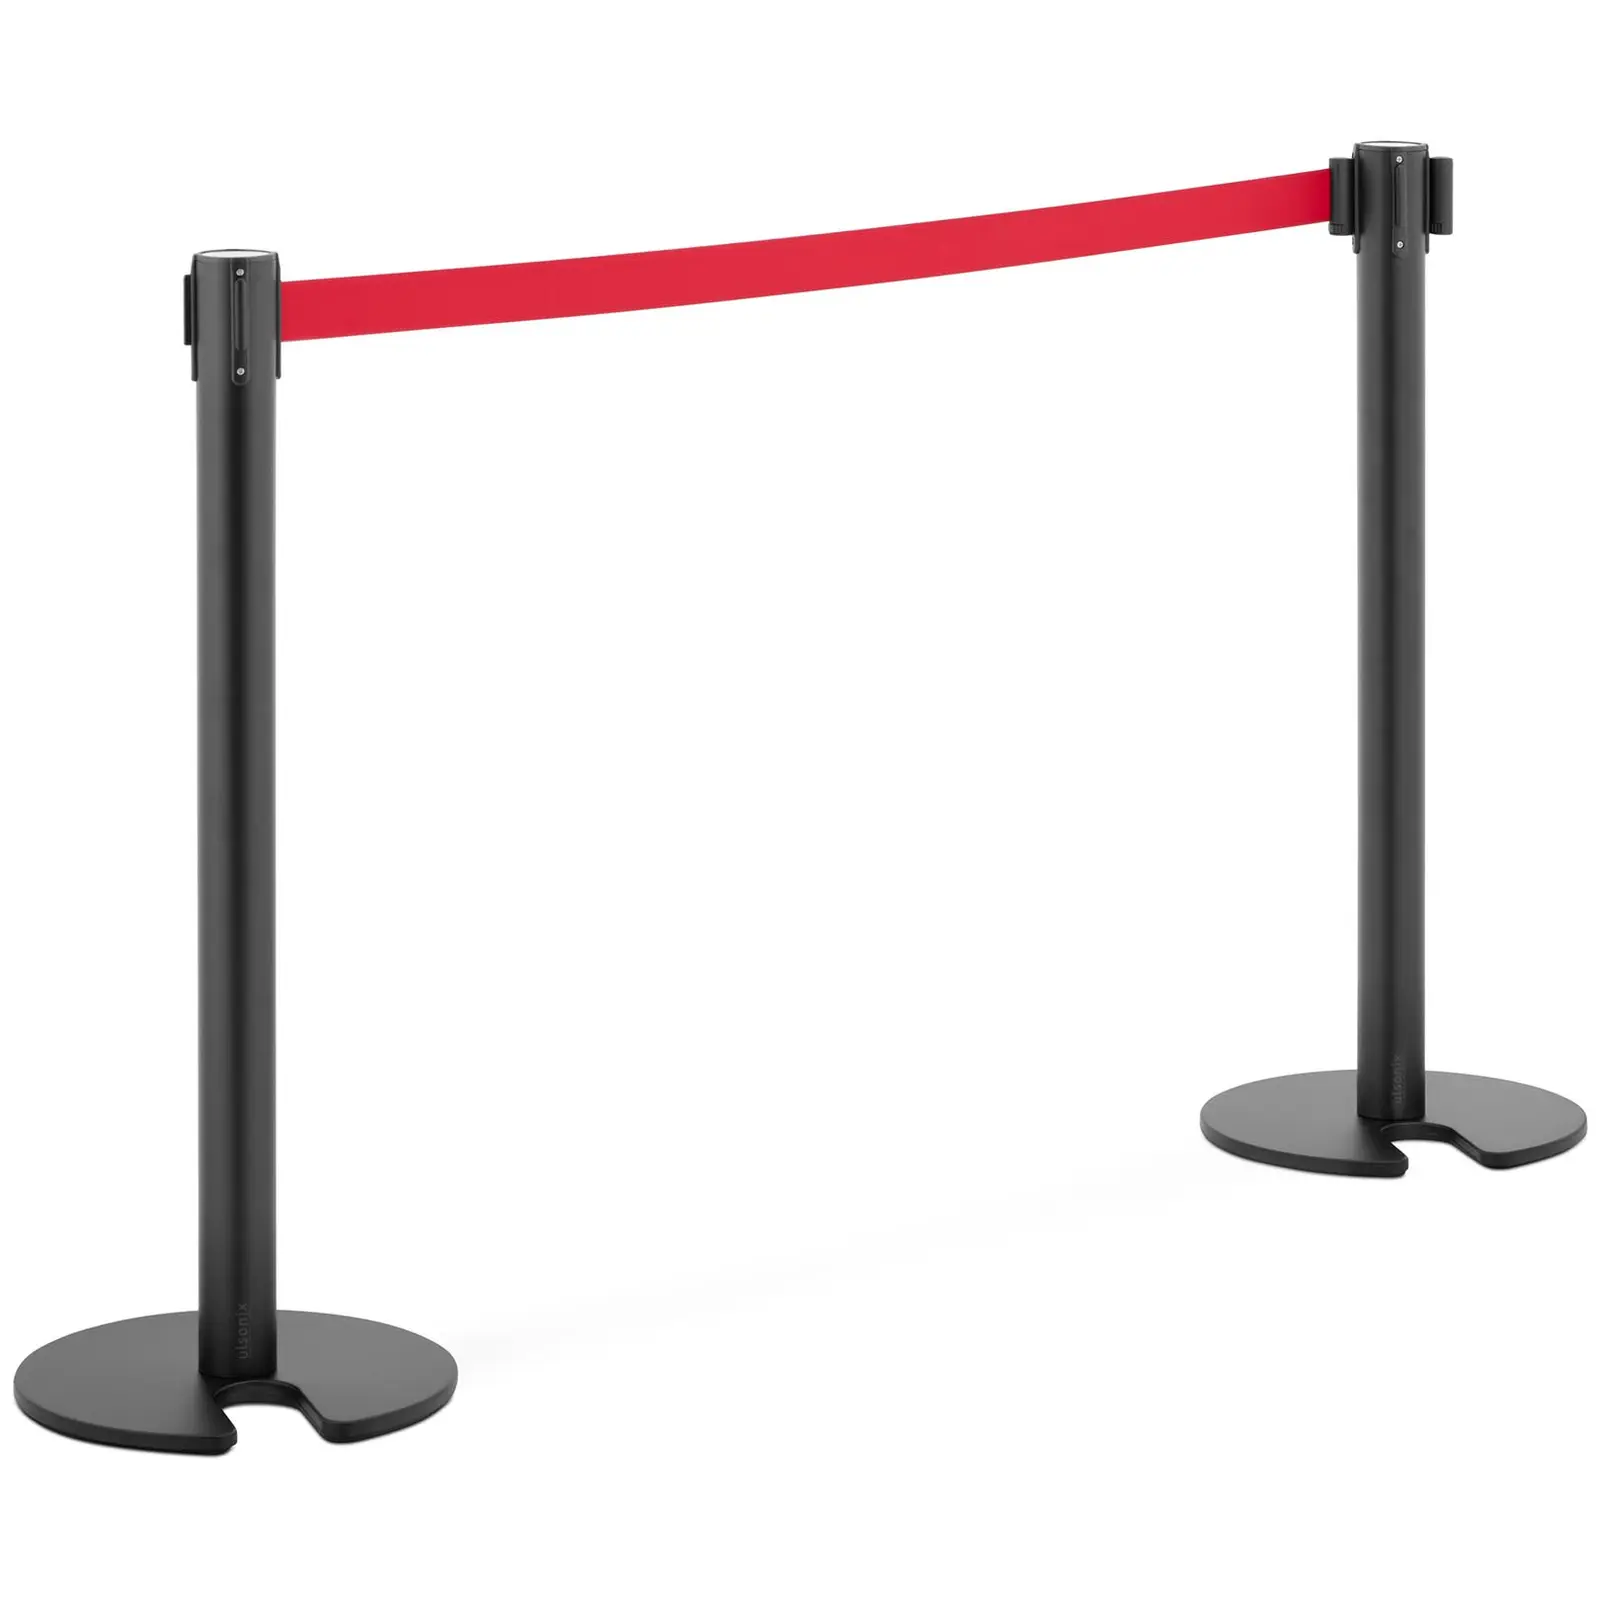 2 Barrier Stands – with strap - 200 cm - black coated - stand with notch